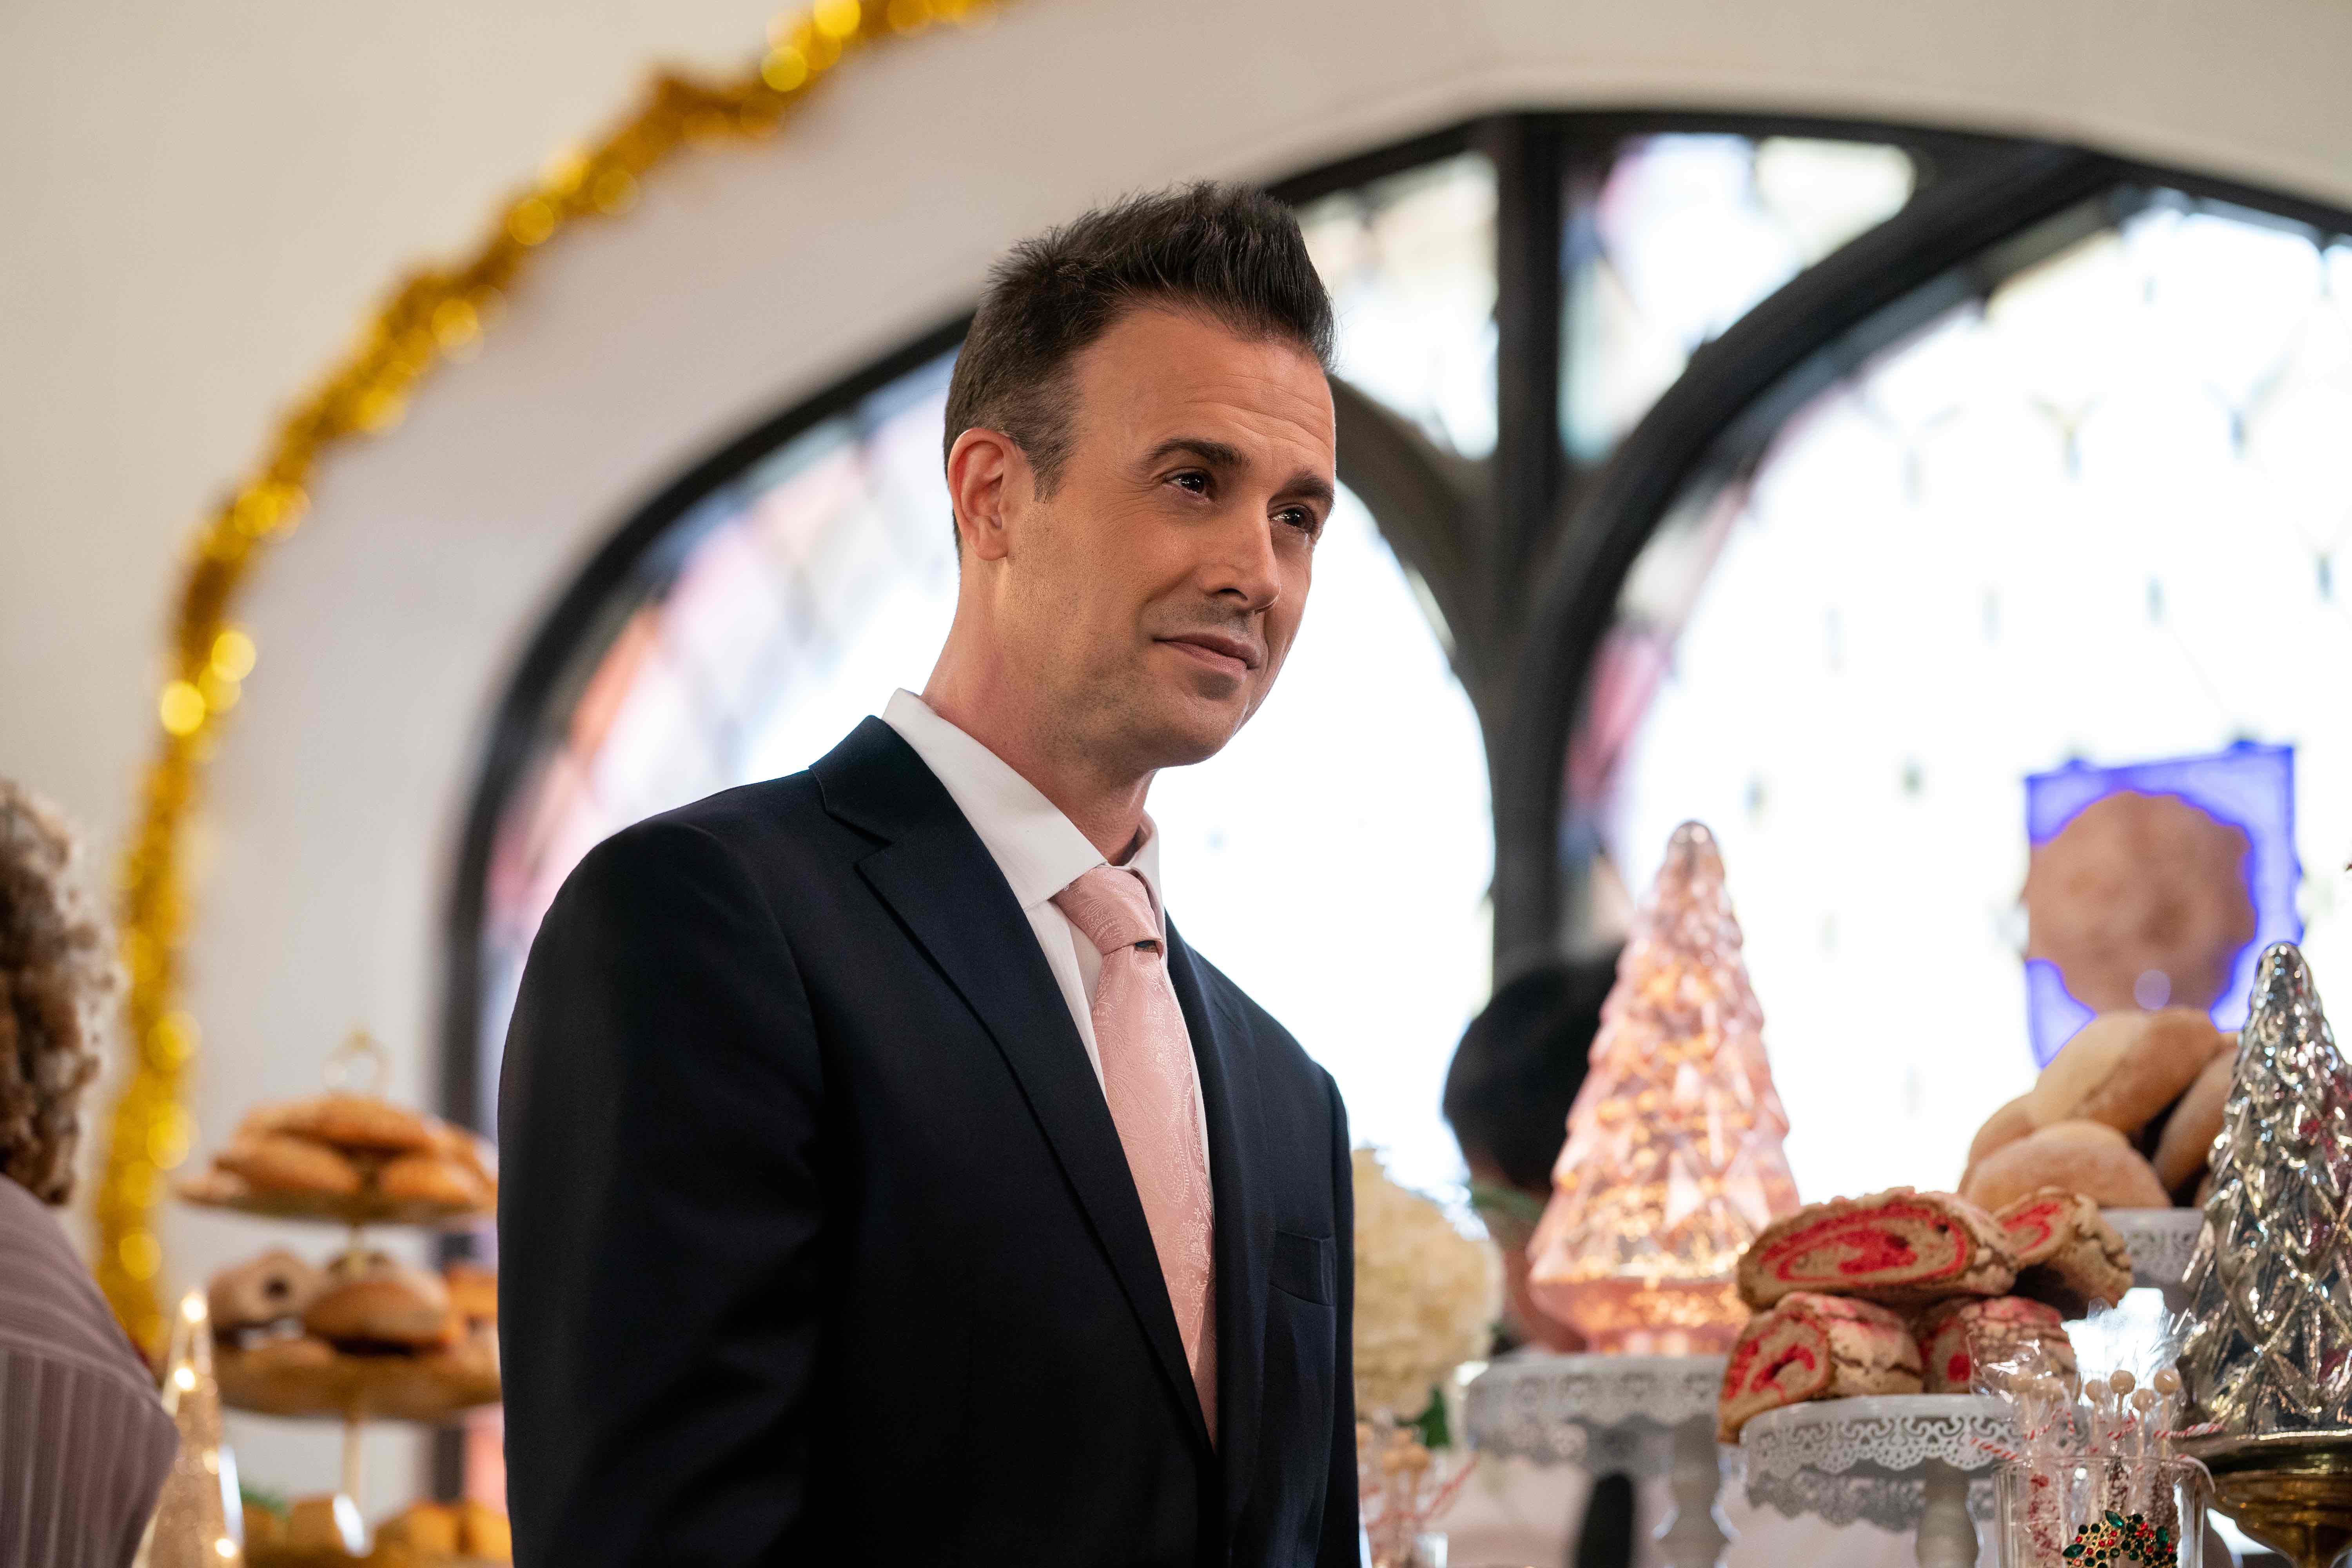 Christmas with You Cast on Netflix - Freddie Prinze Jr. as Miguel